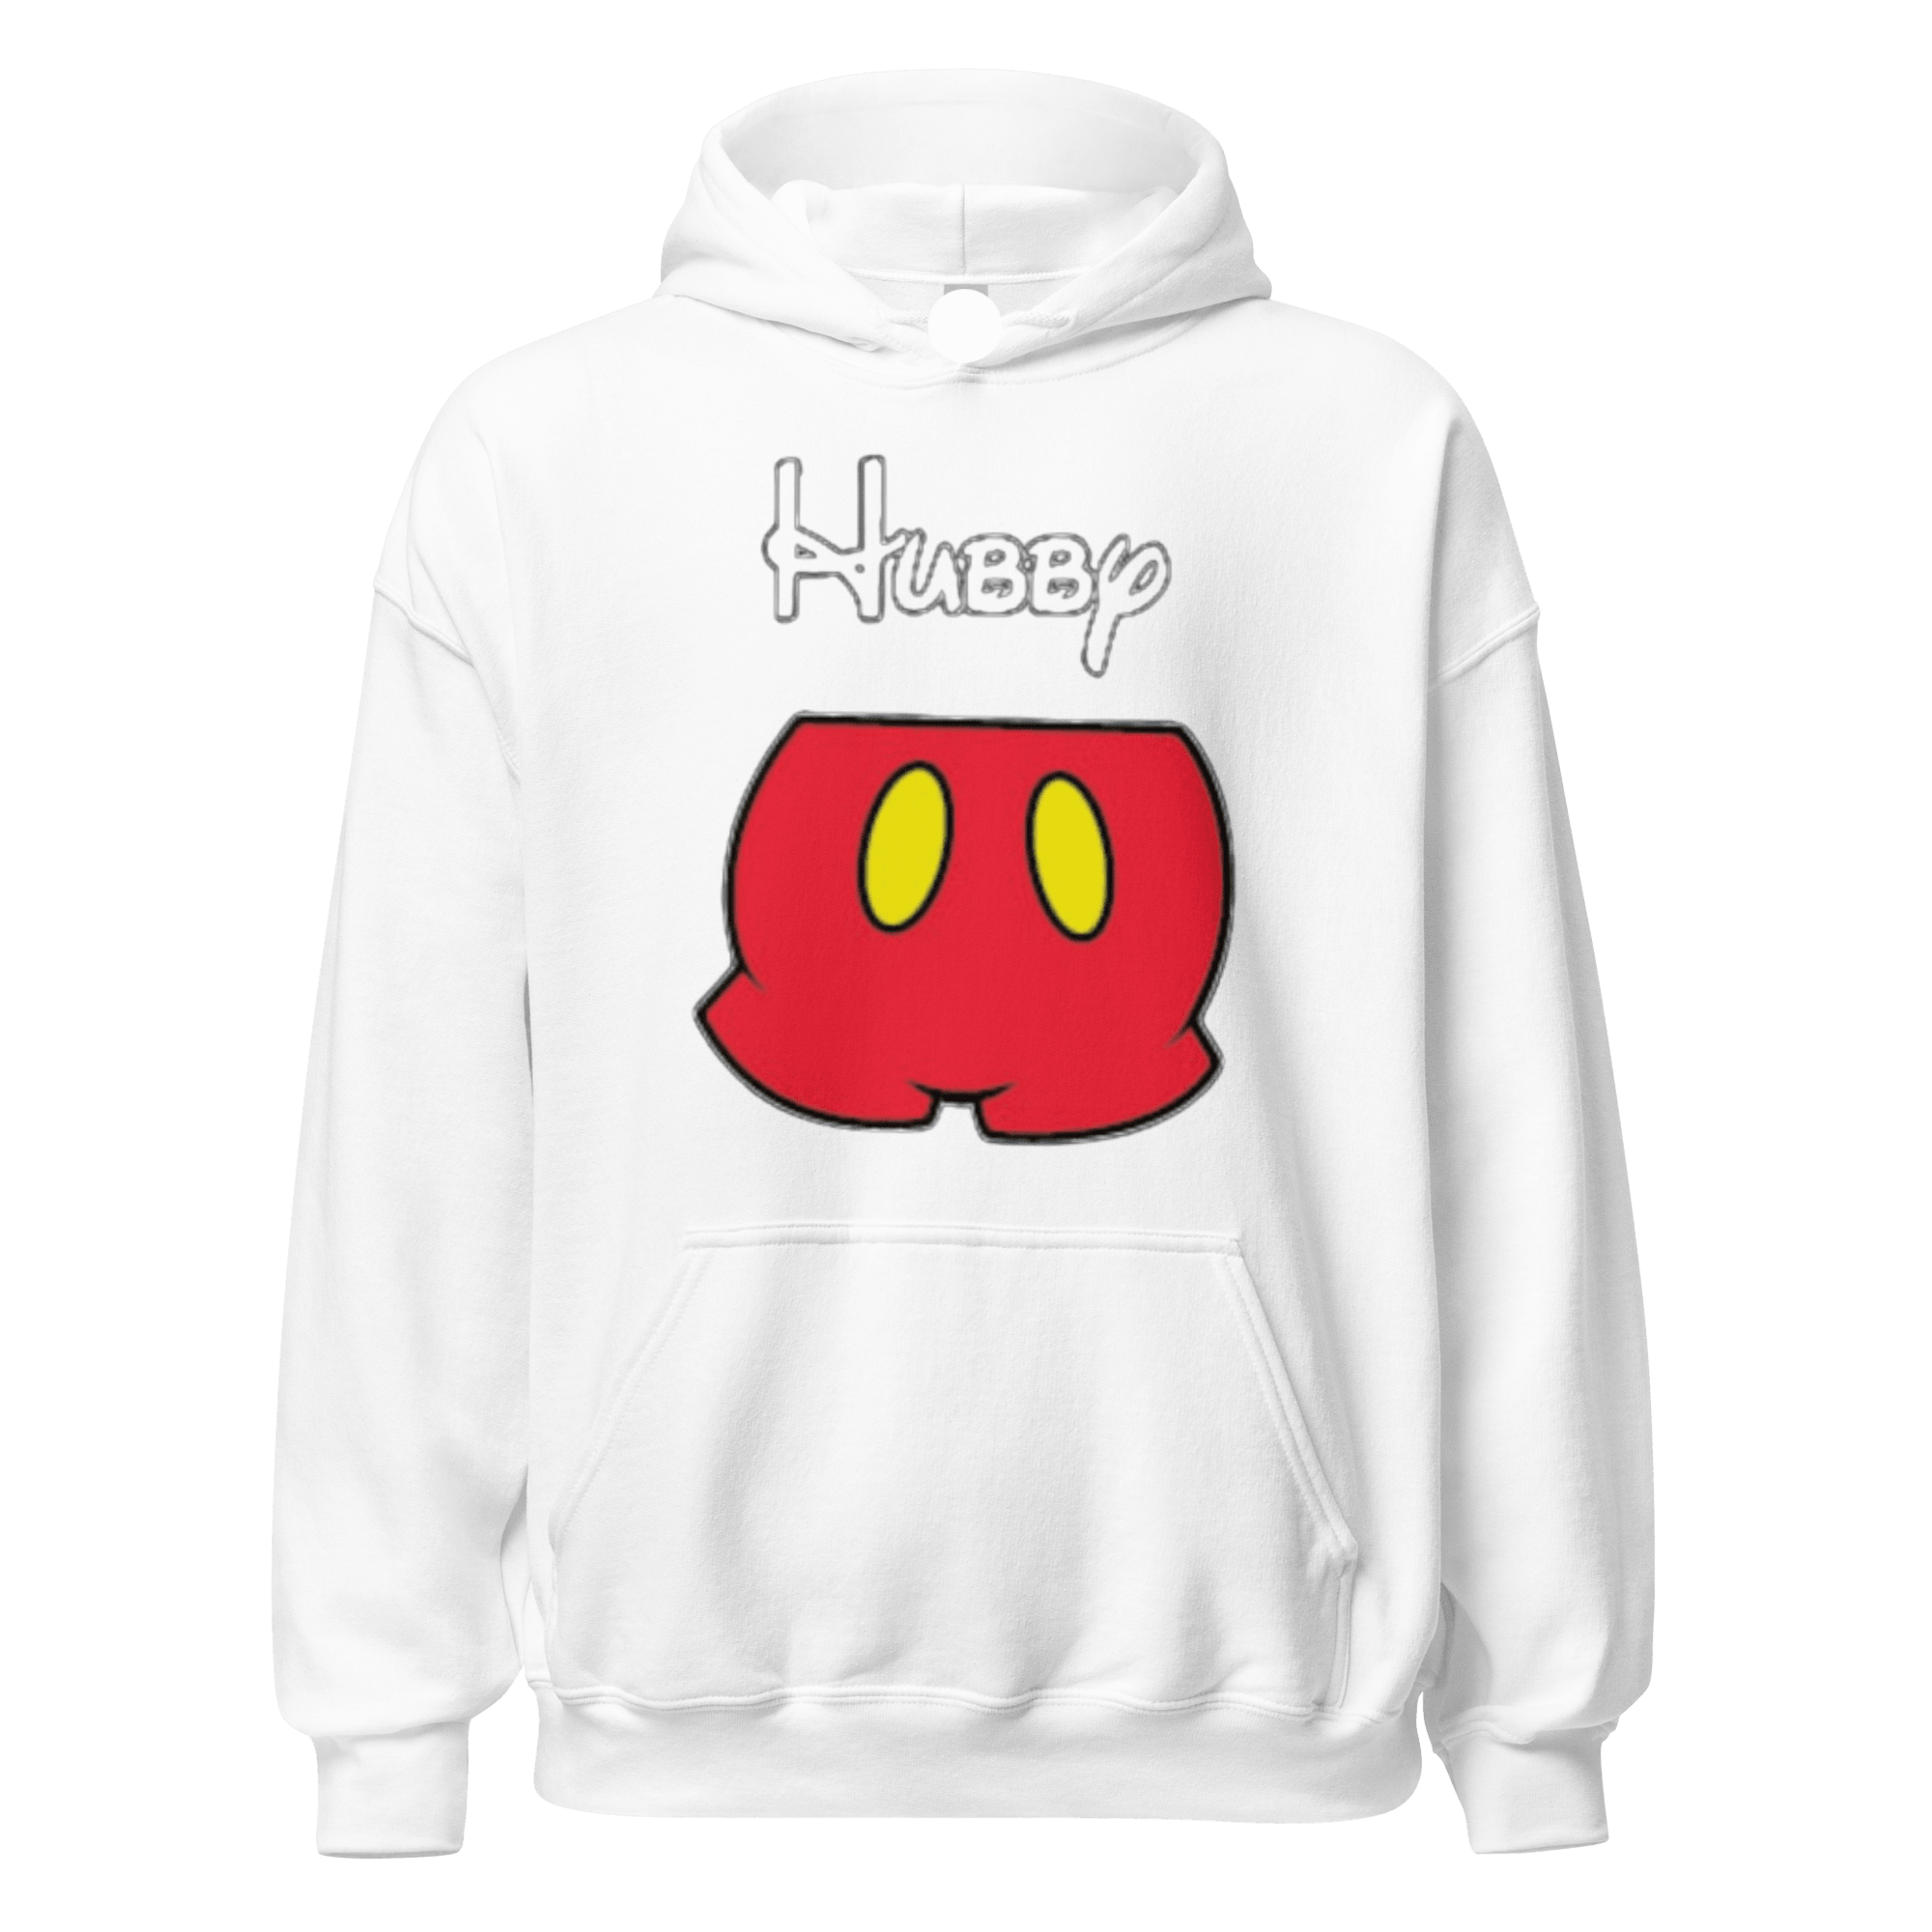 Animated Inspired Hubby/Wifey Realationship Hoodie Set Ultra Soft Blended Cotton Pullovers - TopKoalaTee